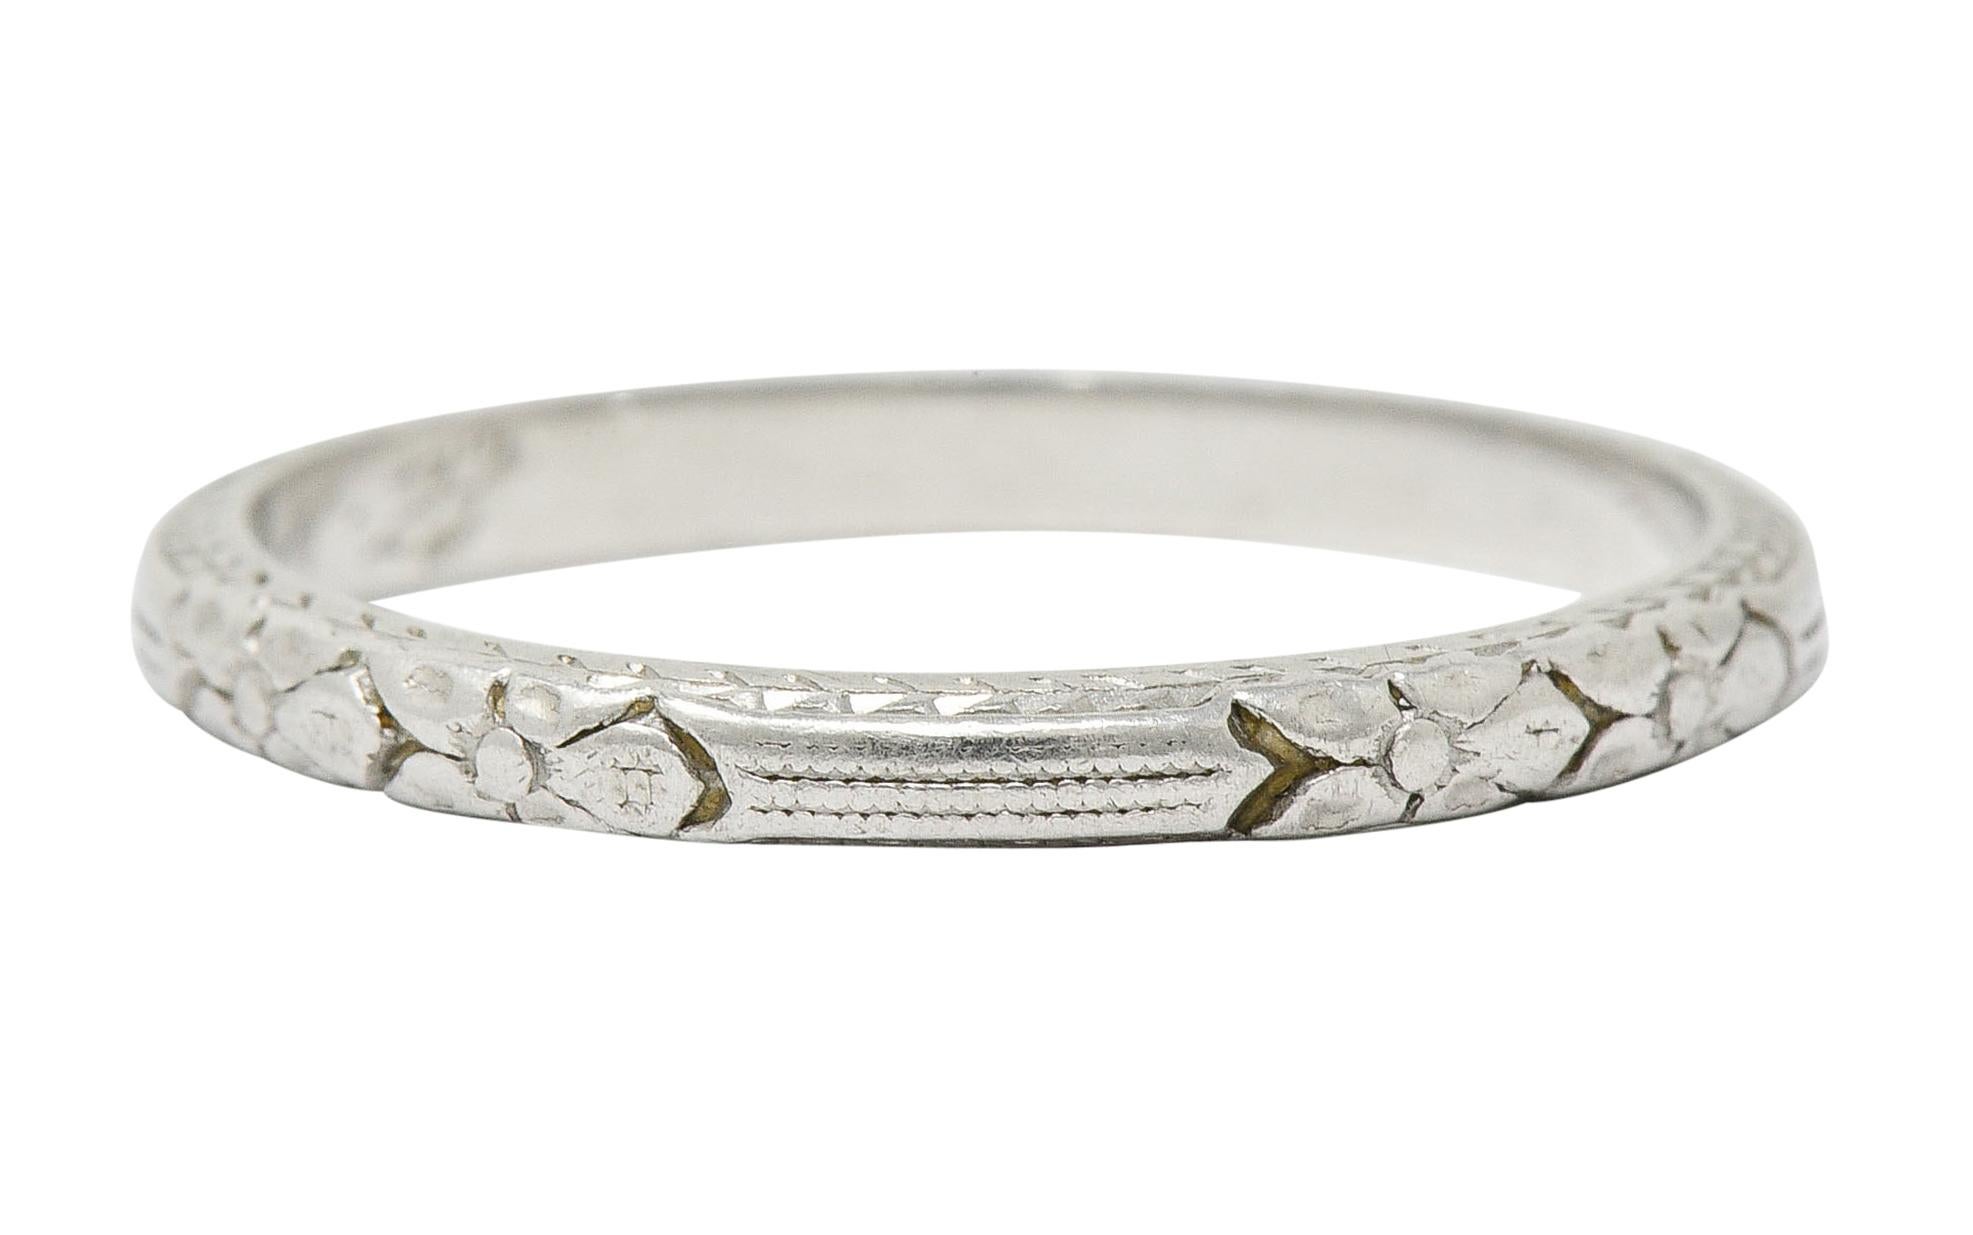 Band ring designed with parallel lines accented by double flower stations

With profile edges depicting a deeply engraved wheat motif

Stamped Platinum

With dated inscription circa 1920s

Ring Size: 5 1/4 & not sizable

Measures: 1.9 mm wide and